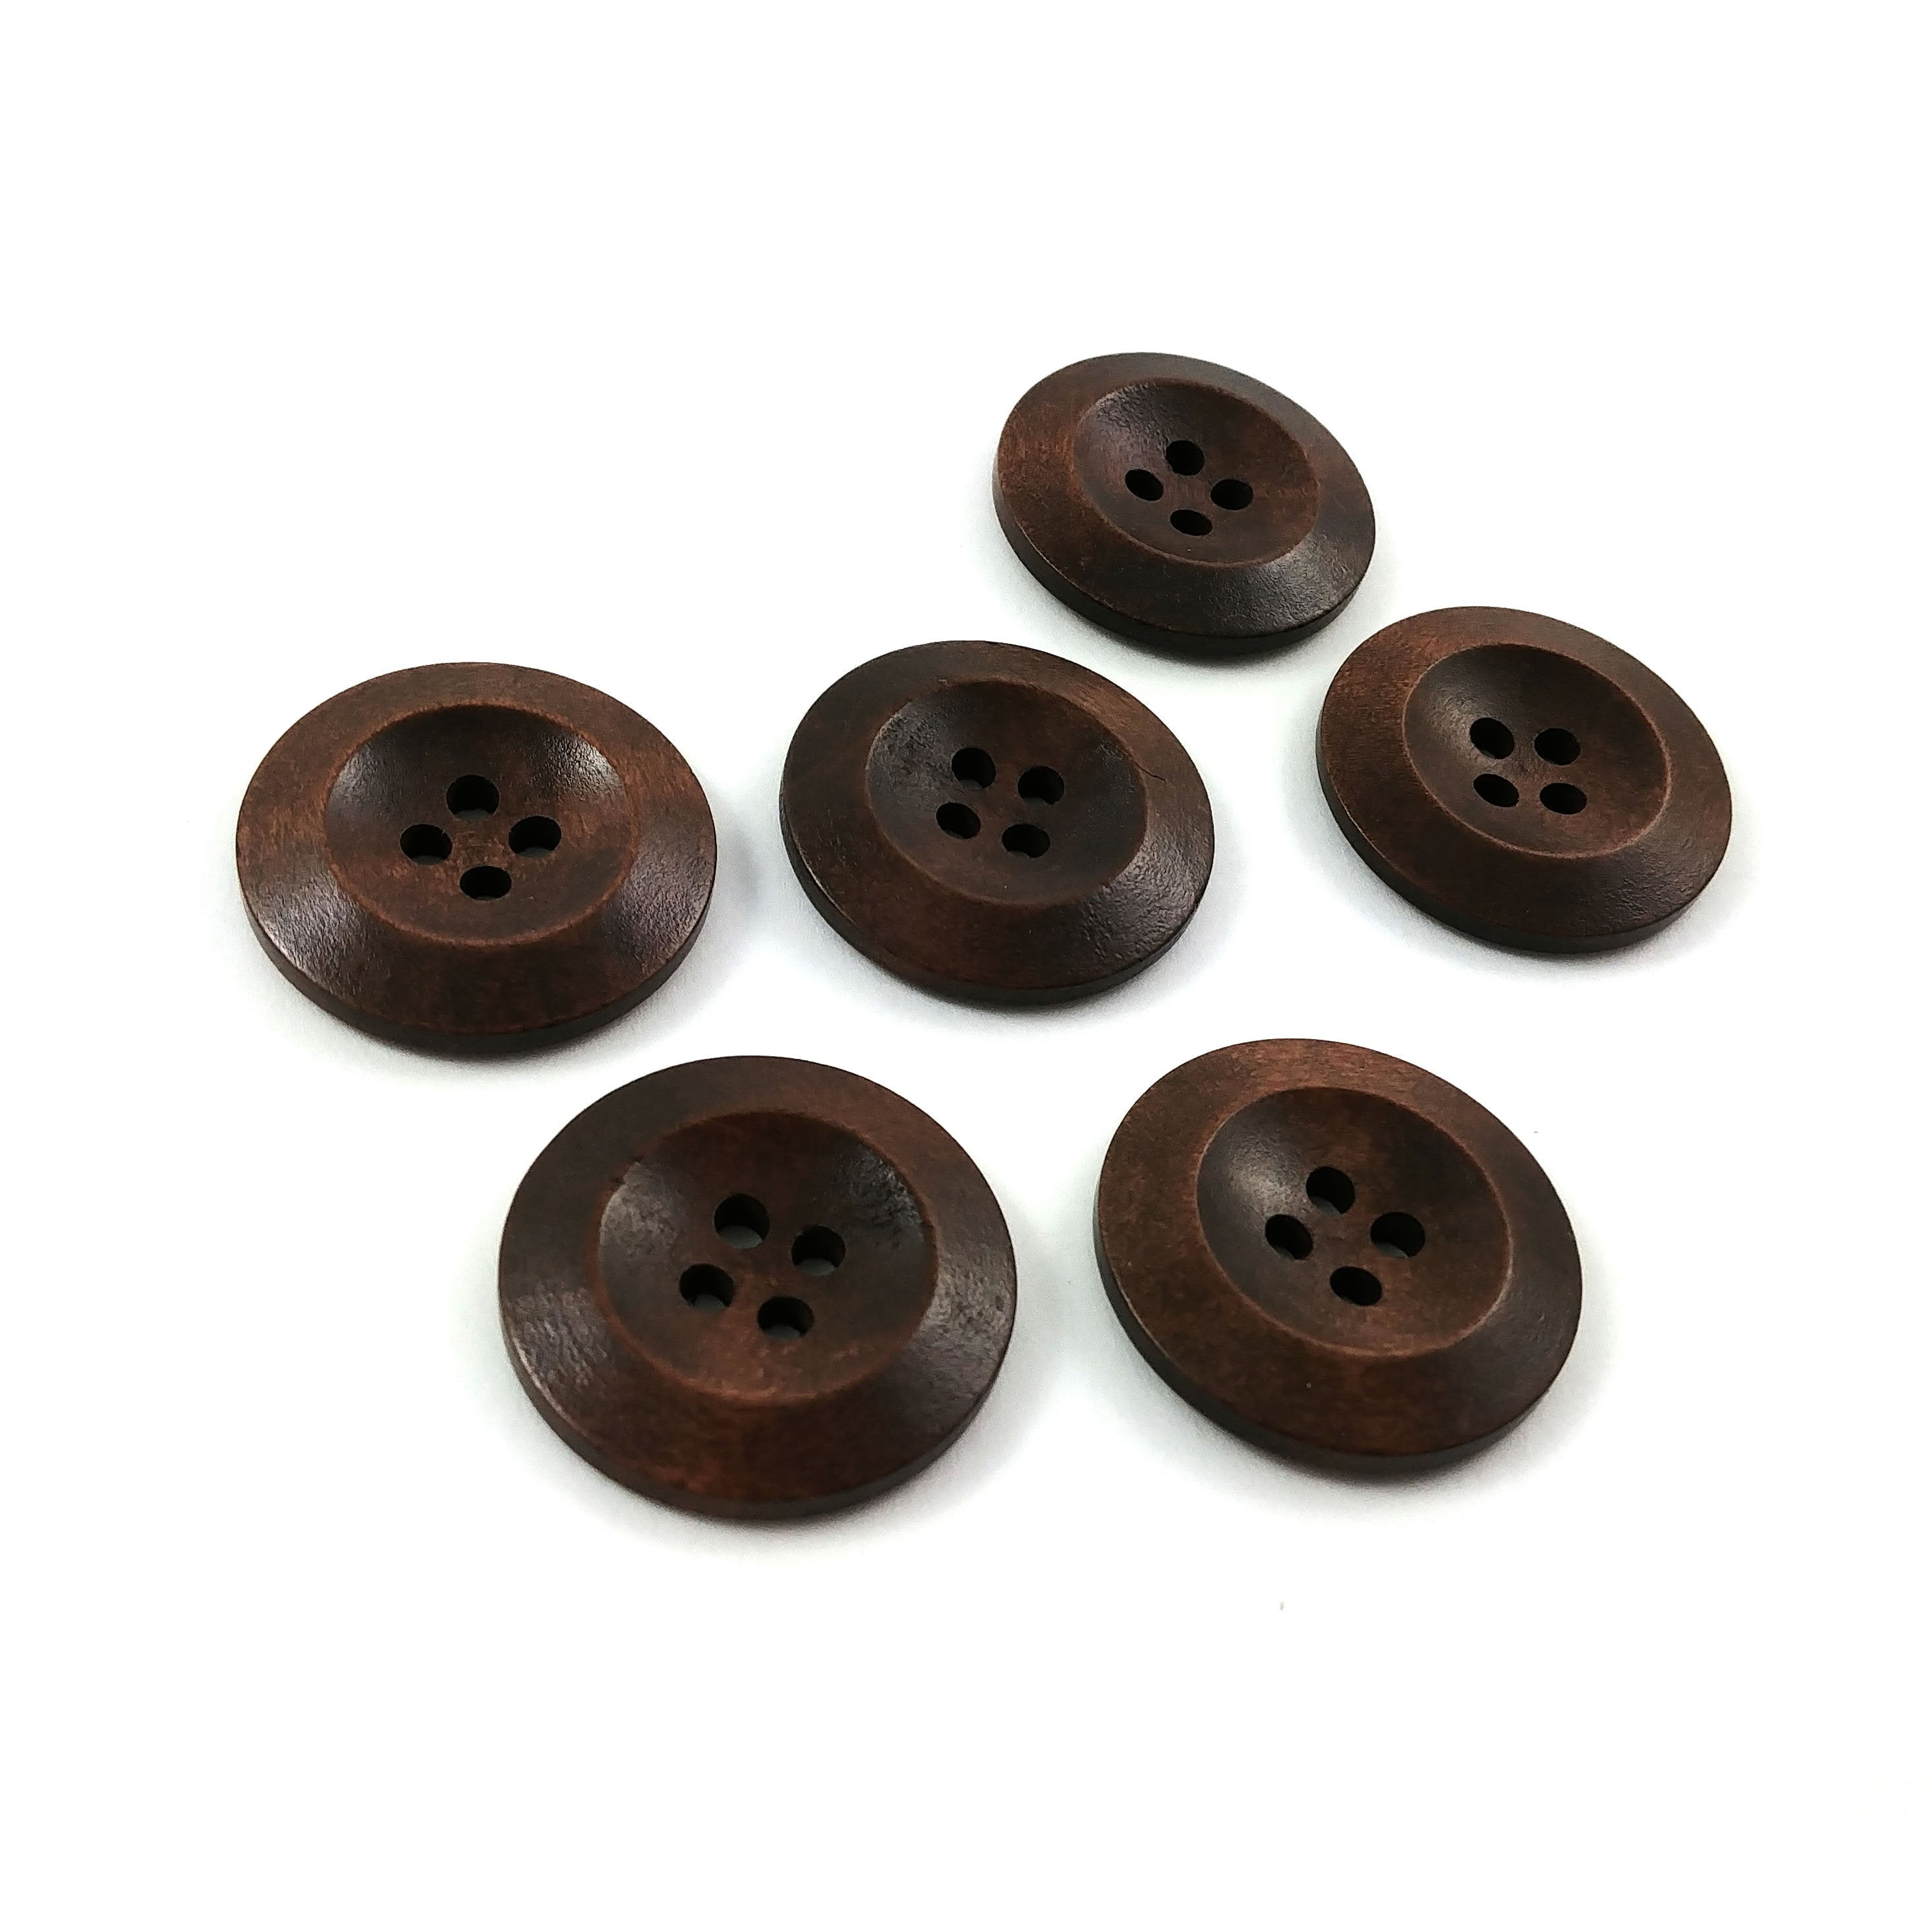 Wholesale Wooden button - Brown 4 Holes Wood Sewing Buttons 15mm - set